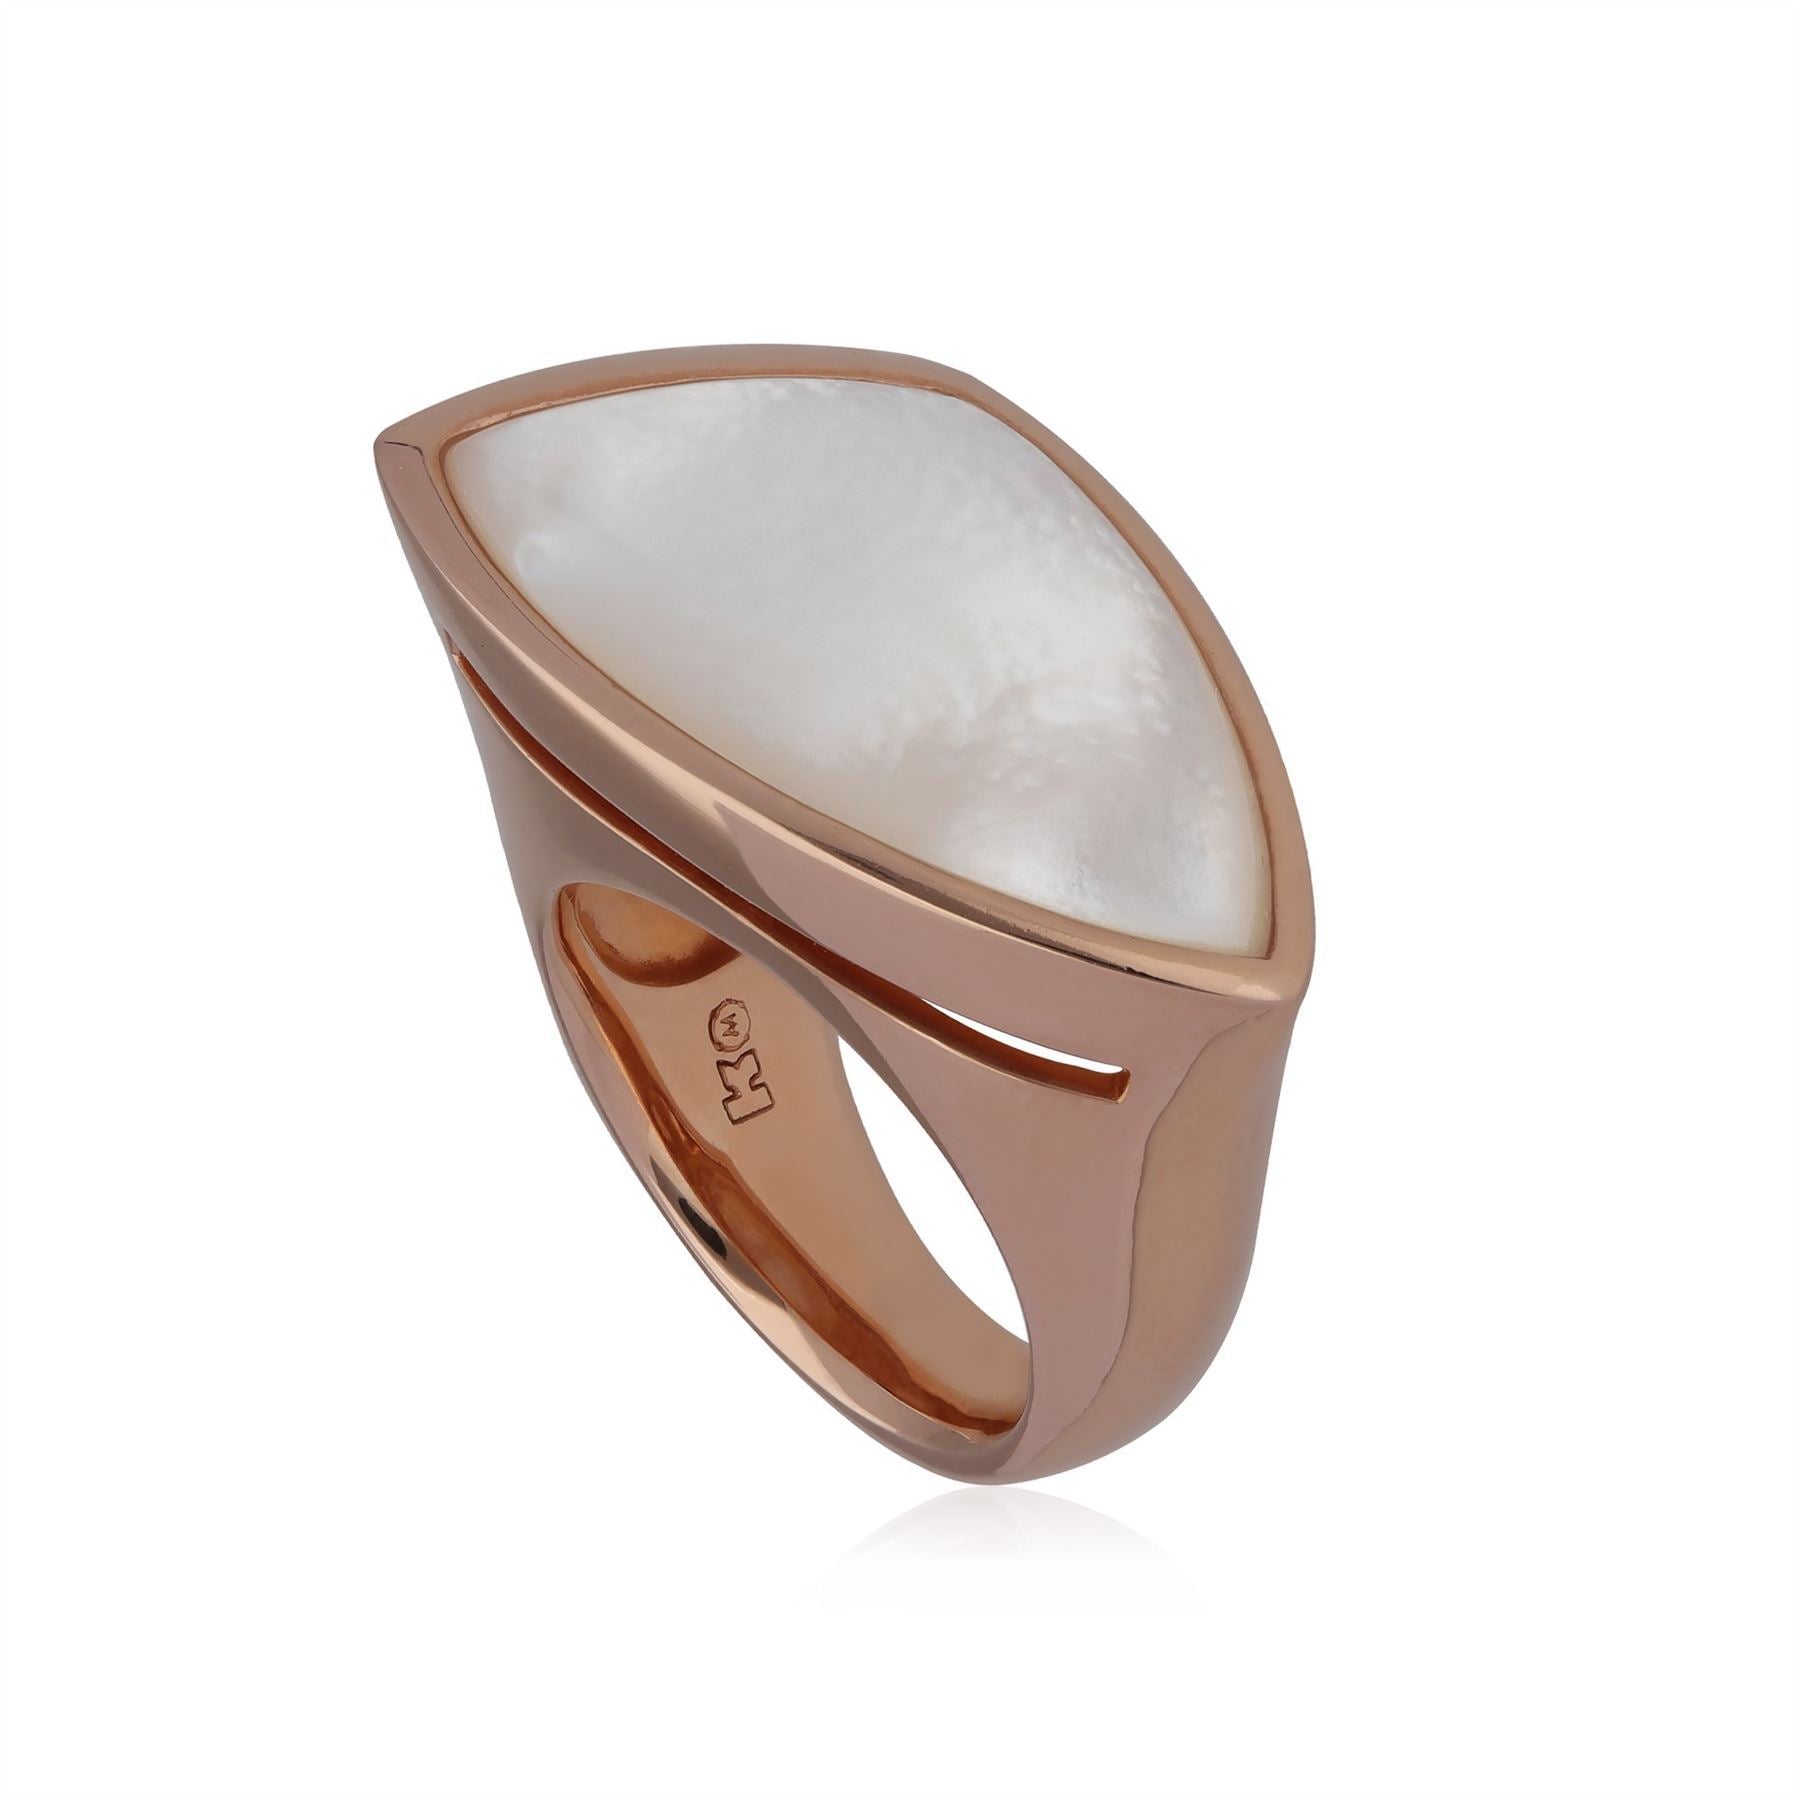 Kosmos Angular Mother of Pearl Cocktail Ring in Rose Gold Plated Sterling Silver